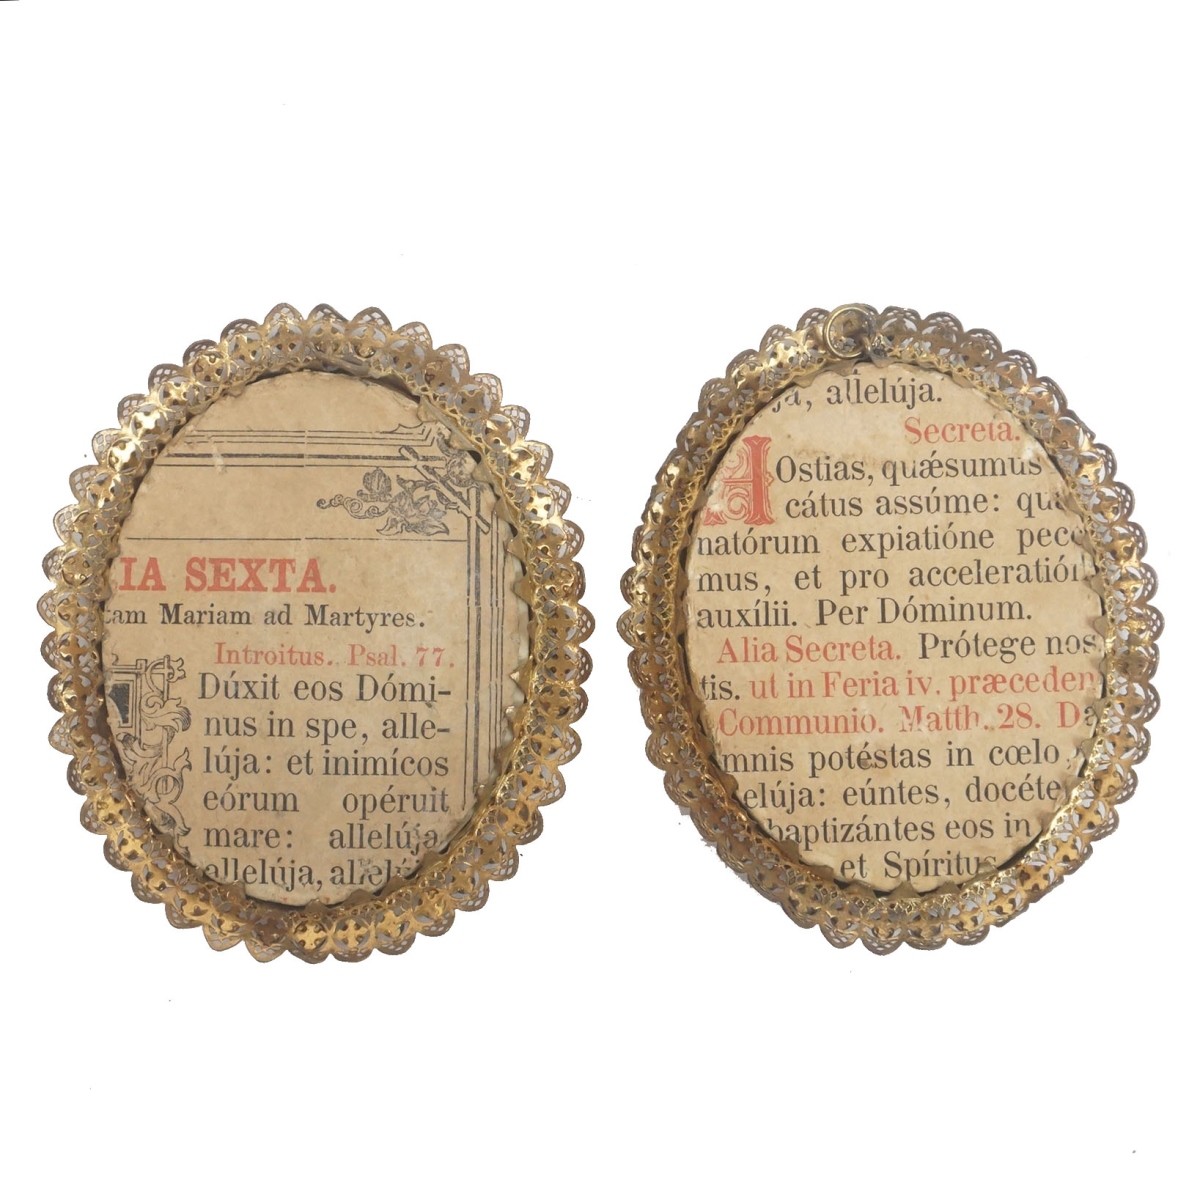 Pair of Miniatures on Celluloid